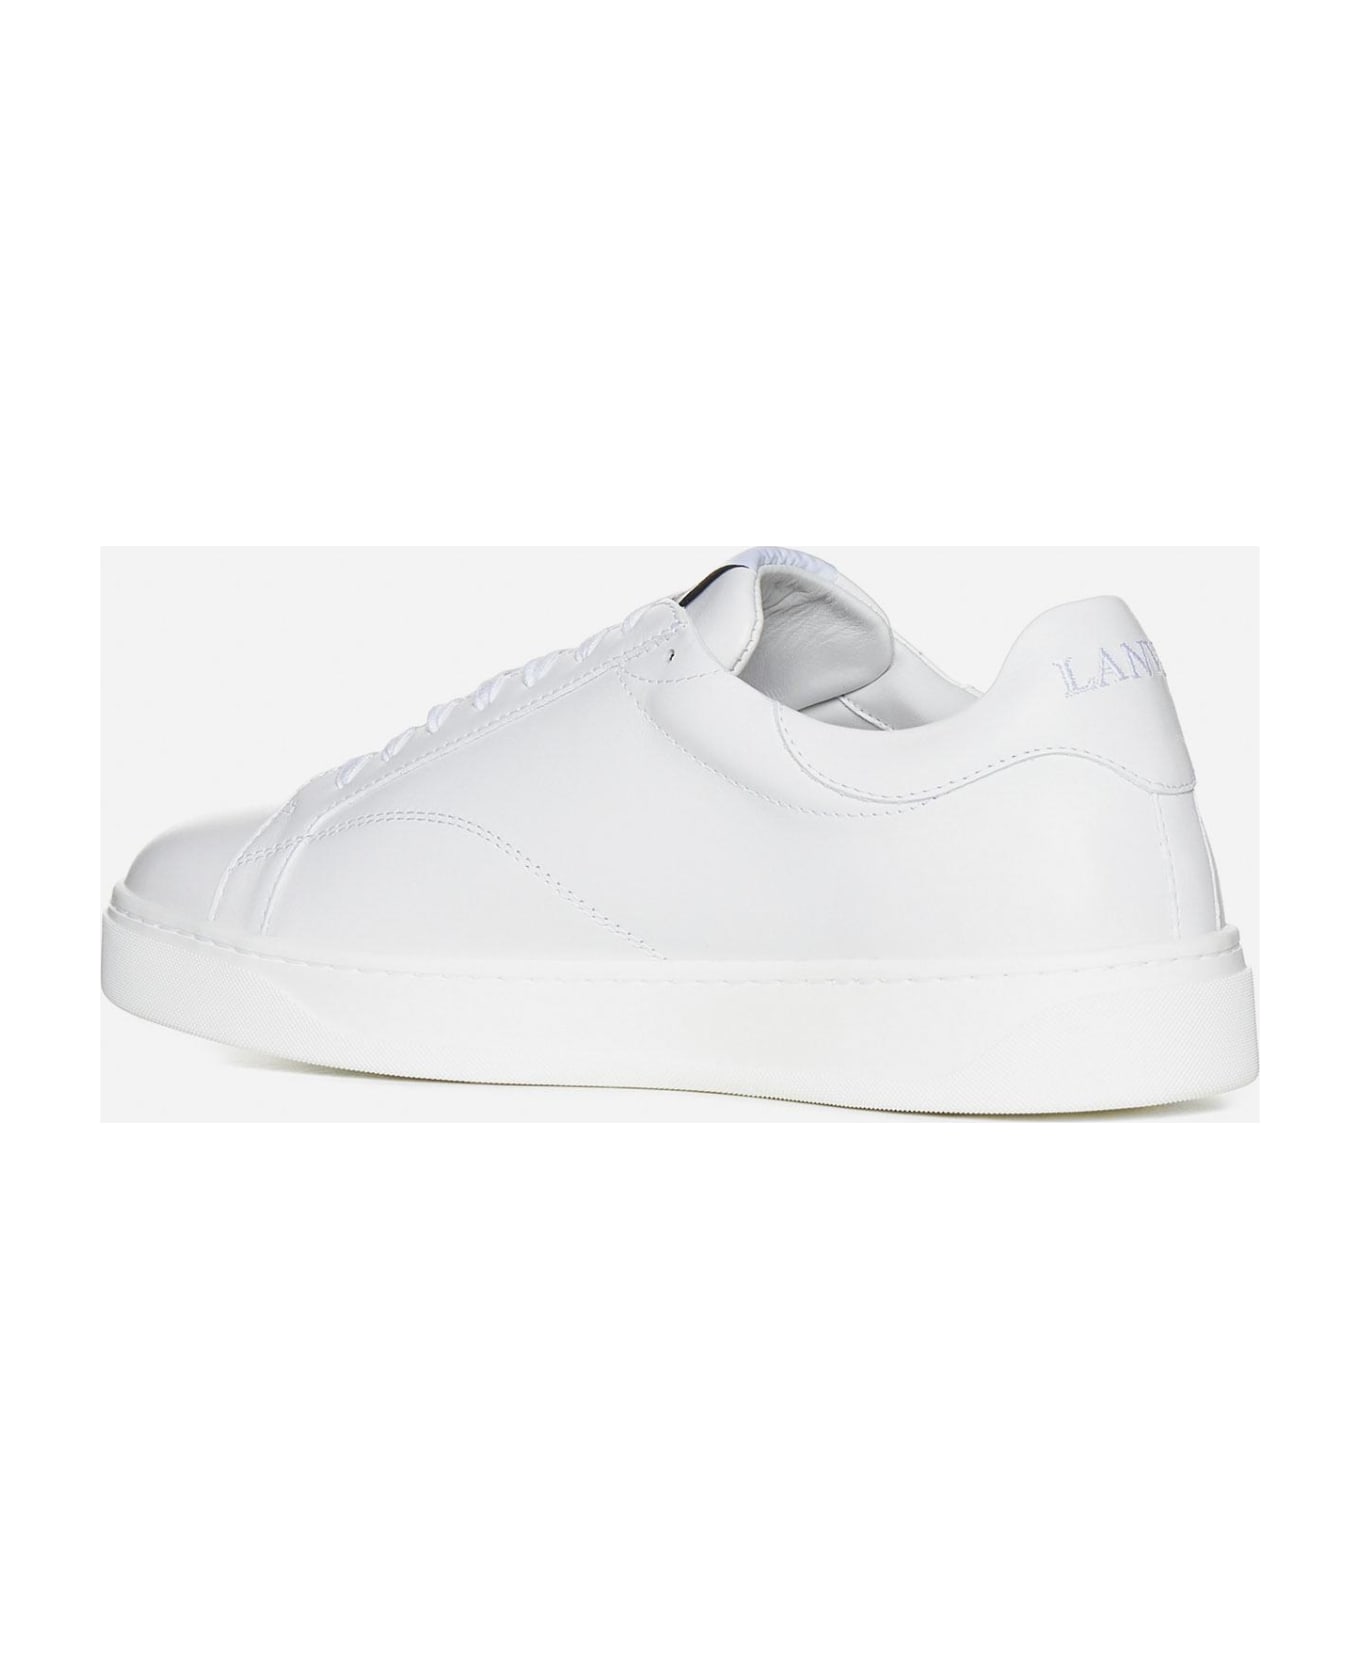 Lanvin Ddb0 Leather Sneakers - White/white